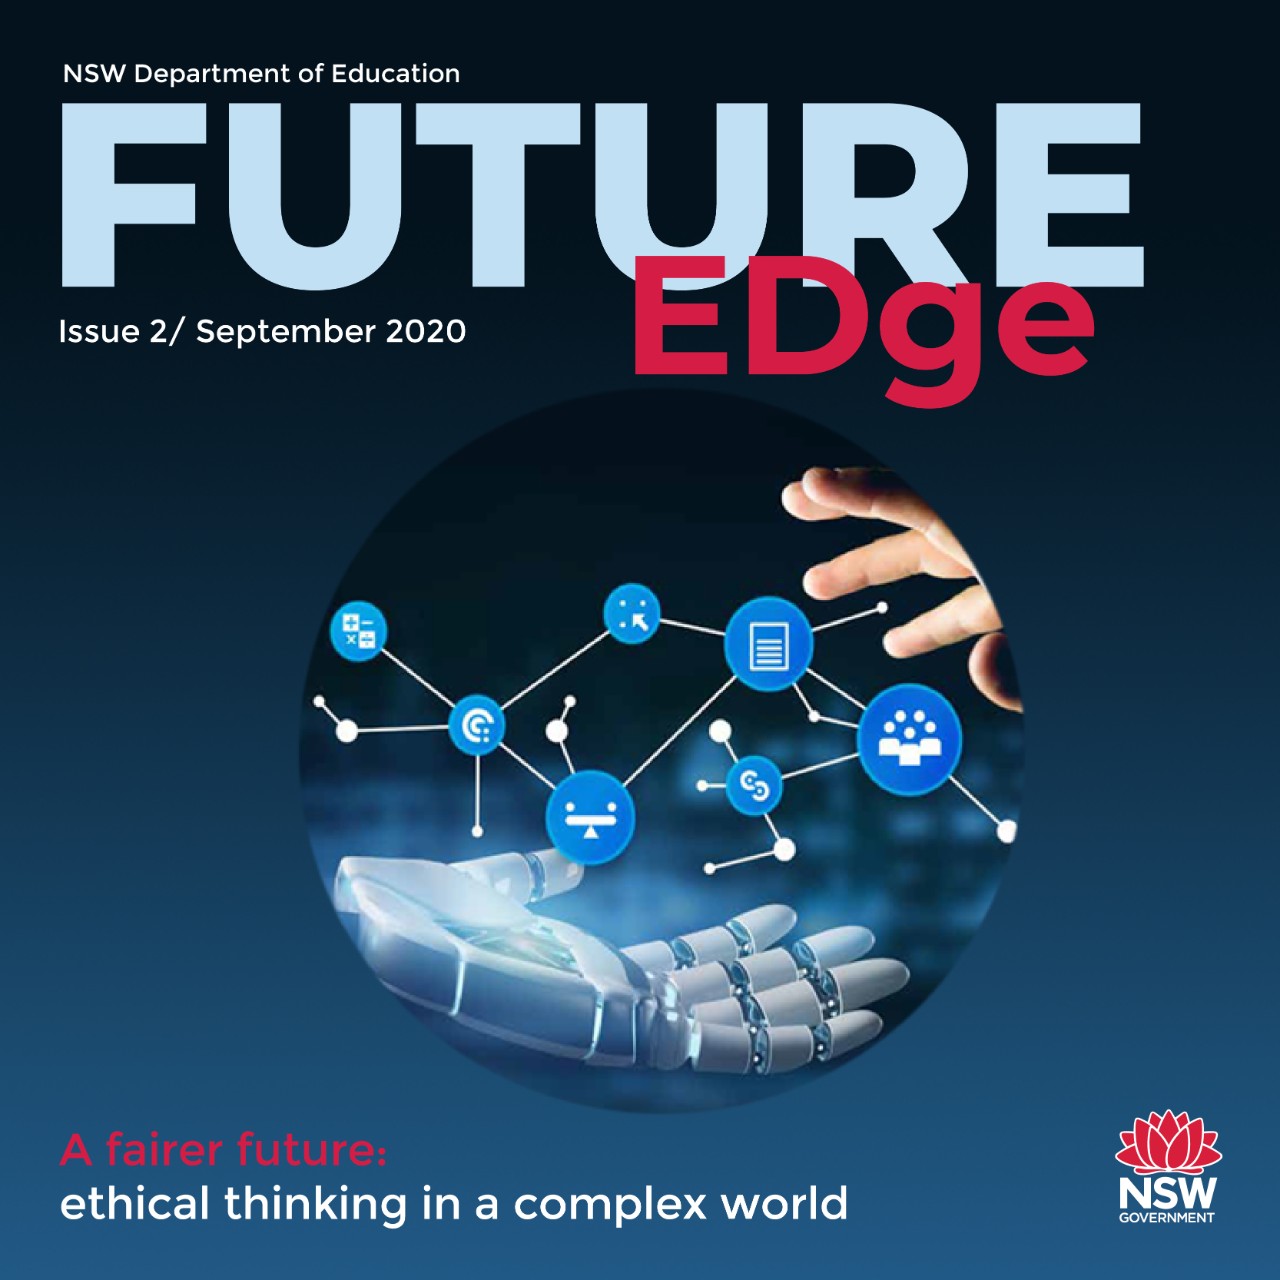 Cover page of Issue 2 of Future EDge